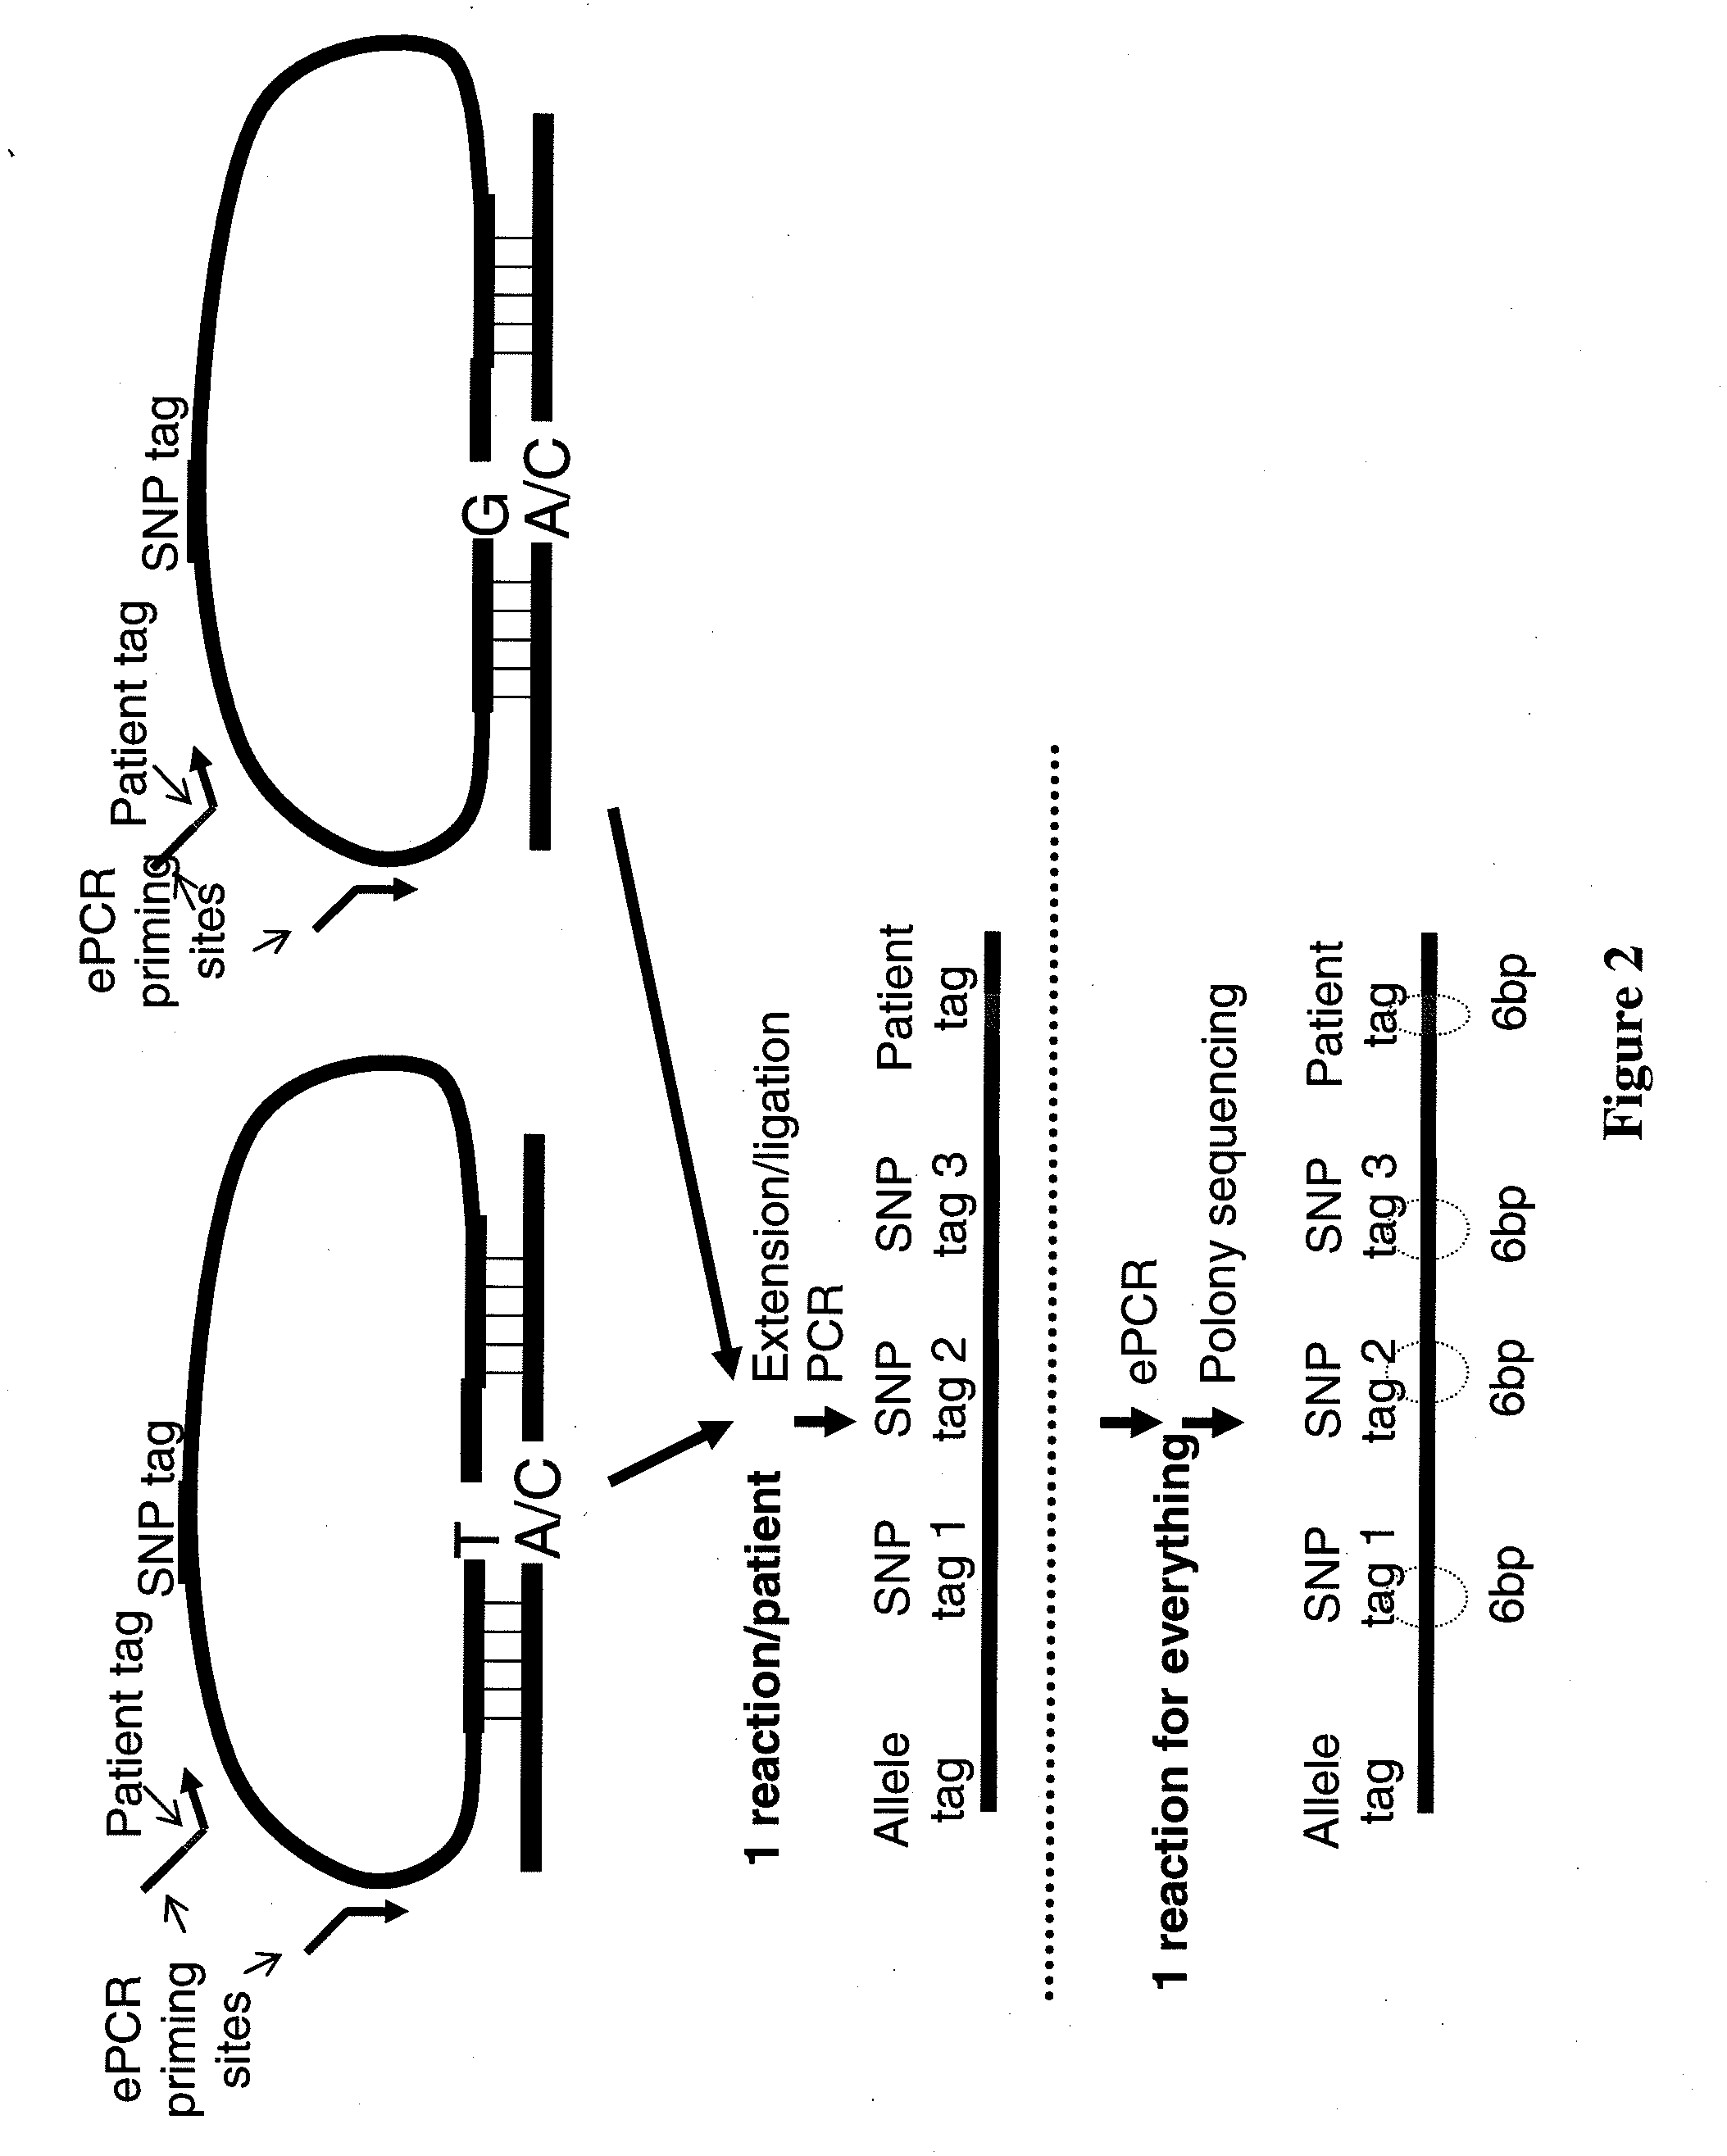 Methods for making nucleotide probes for sequencing and synthesis